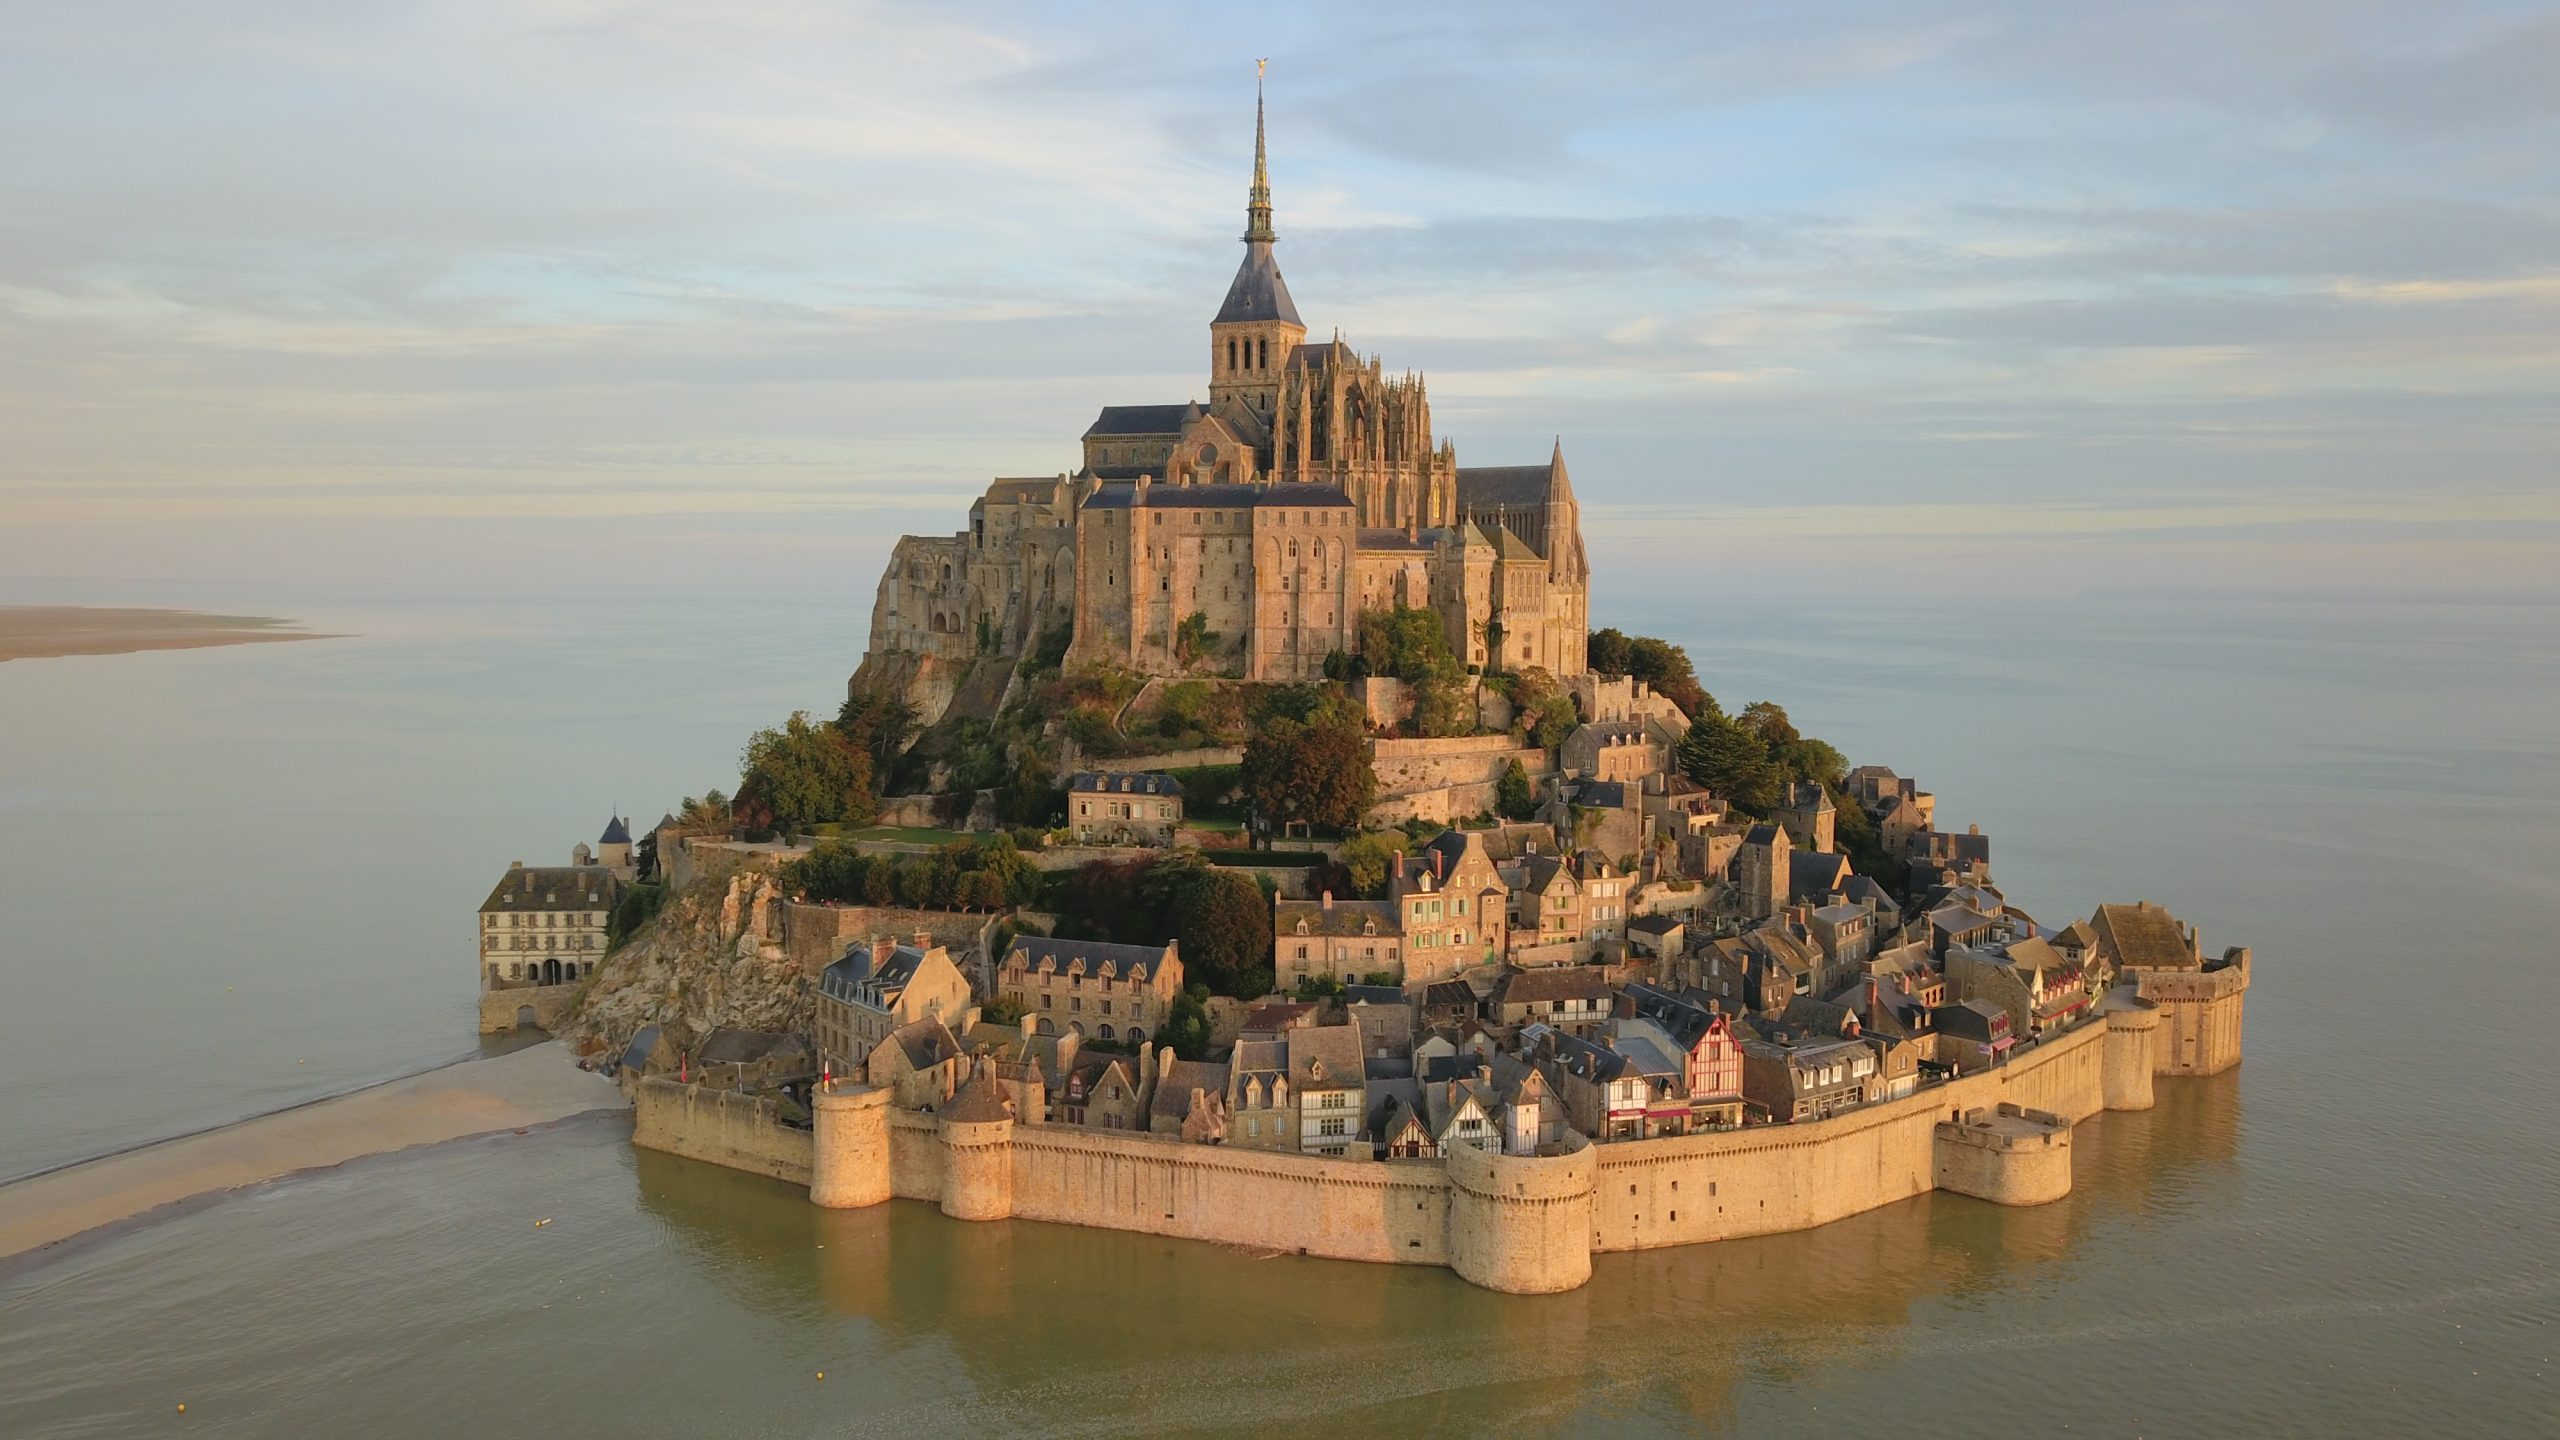 30 Must-See European Fortresses, Forts and Fortified Towns